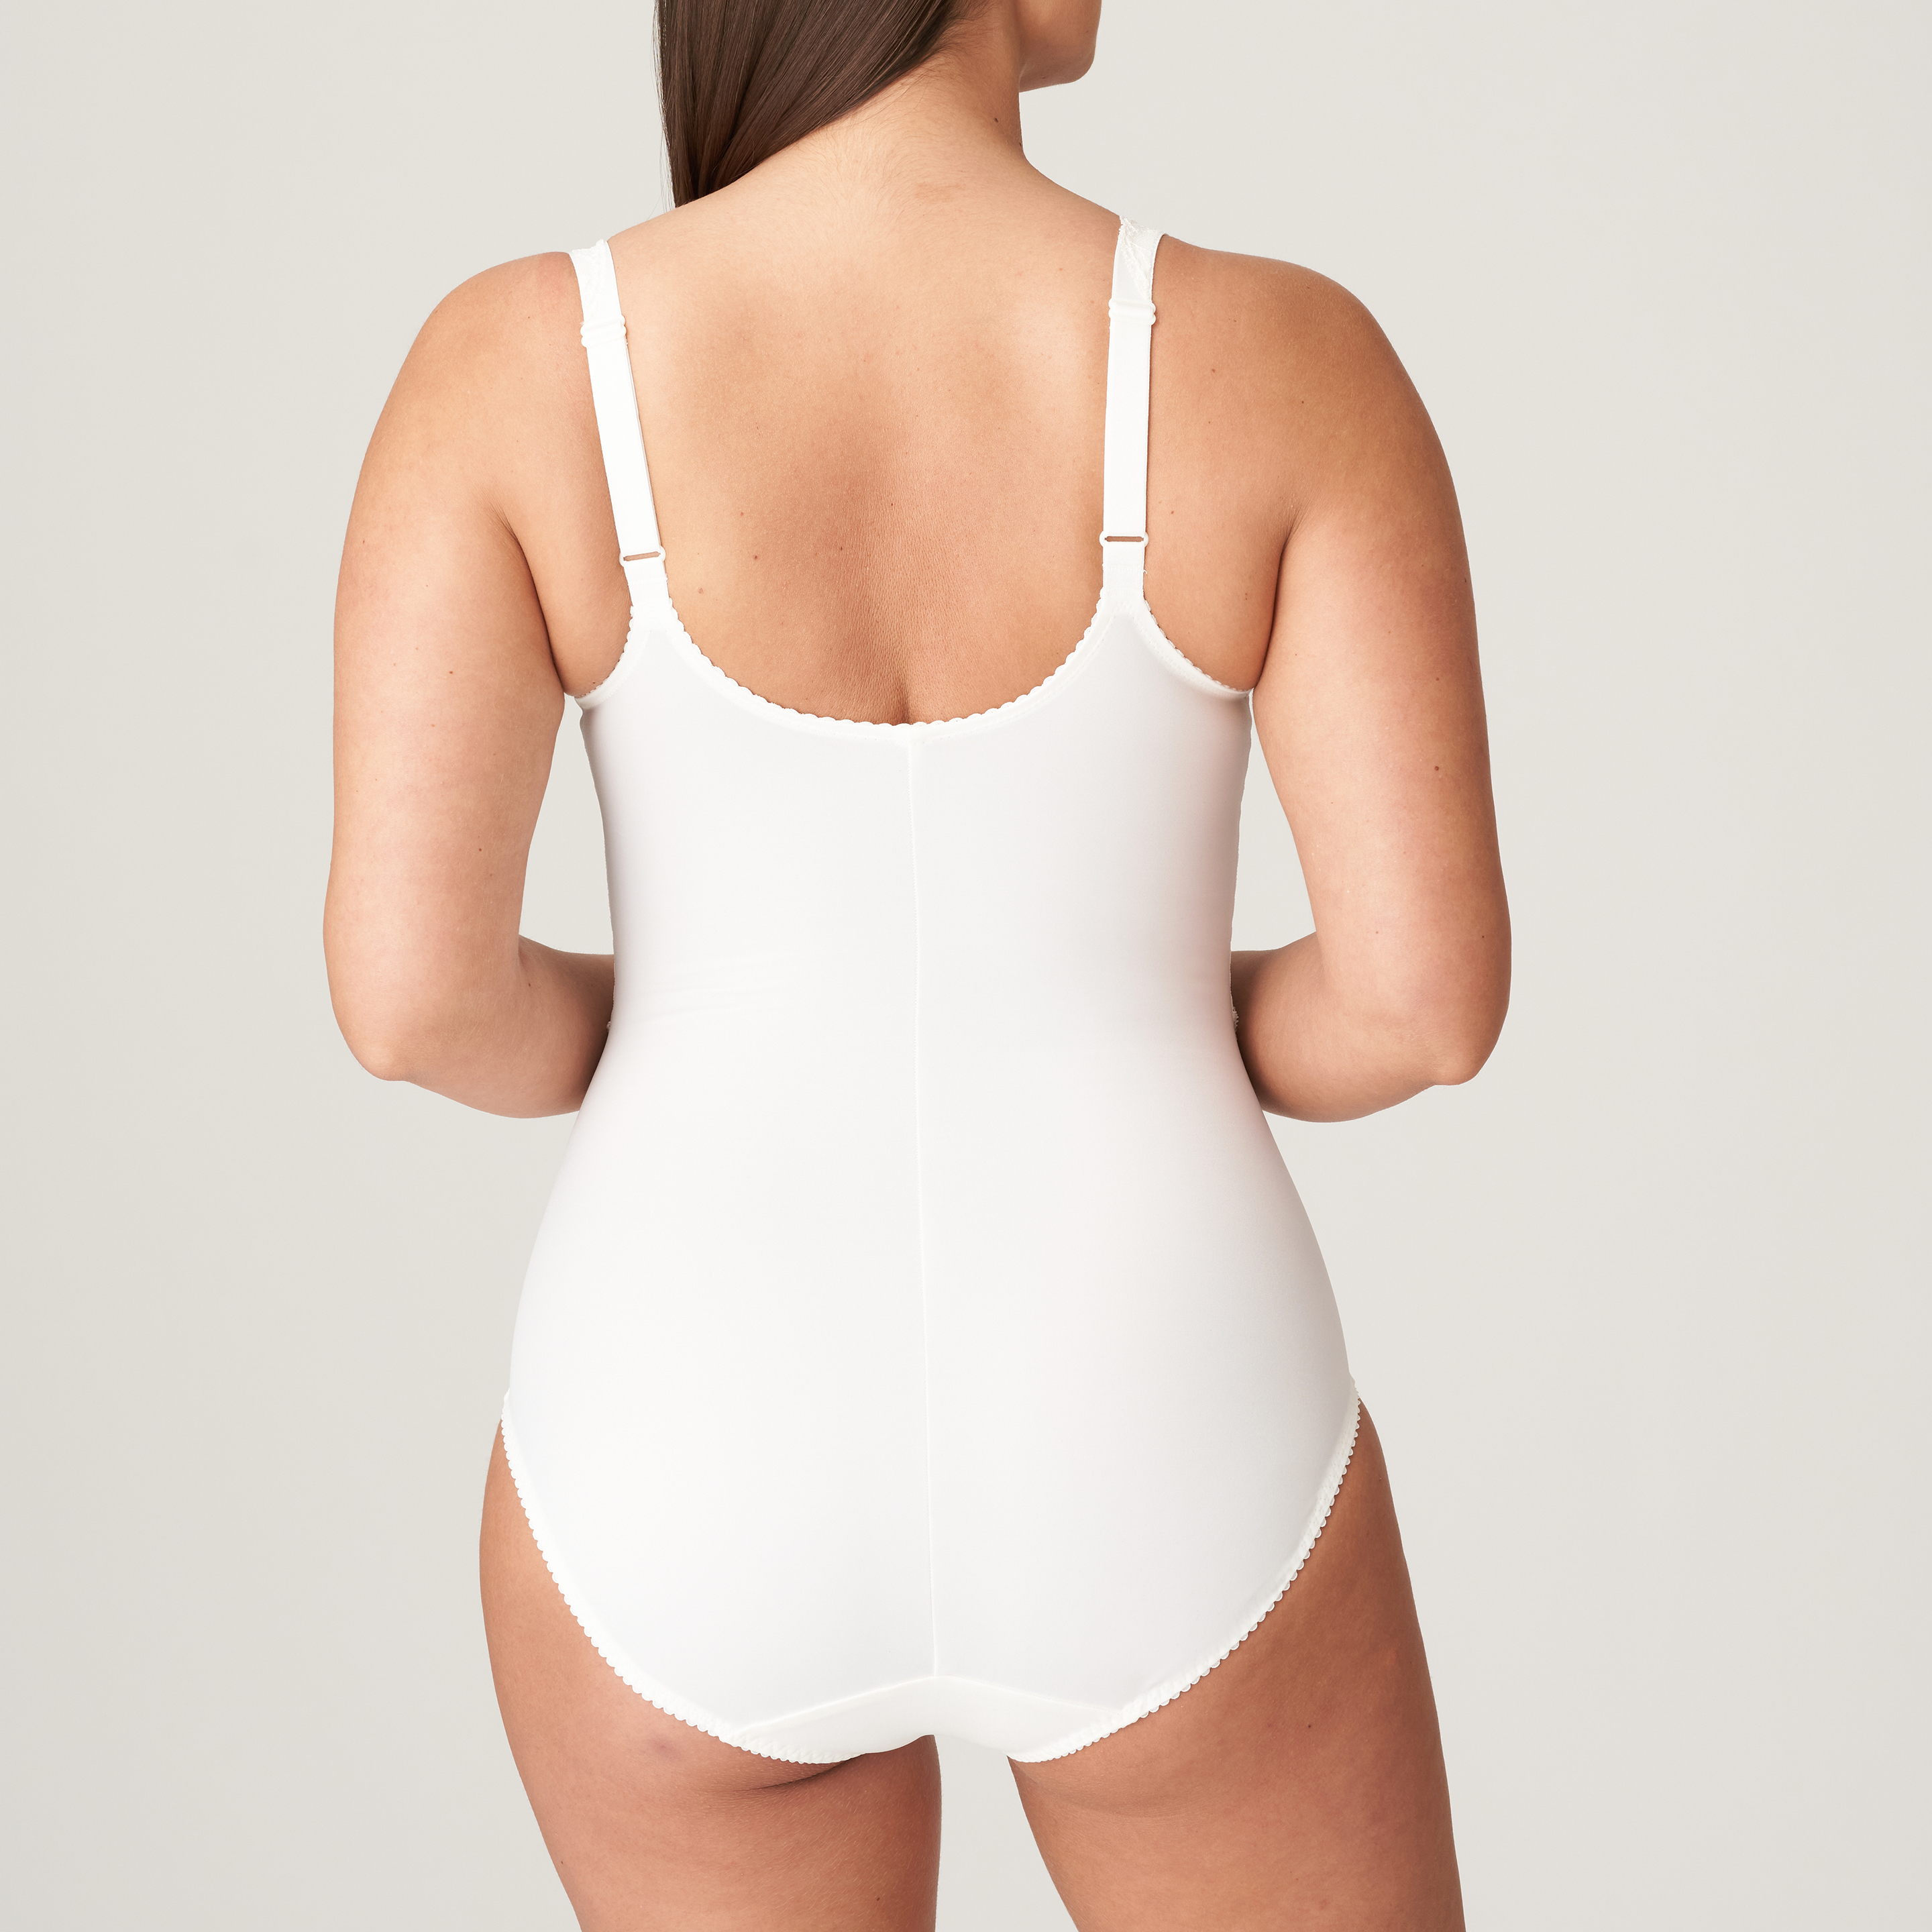 PrimaDonna MADISON natural full cup body